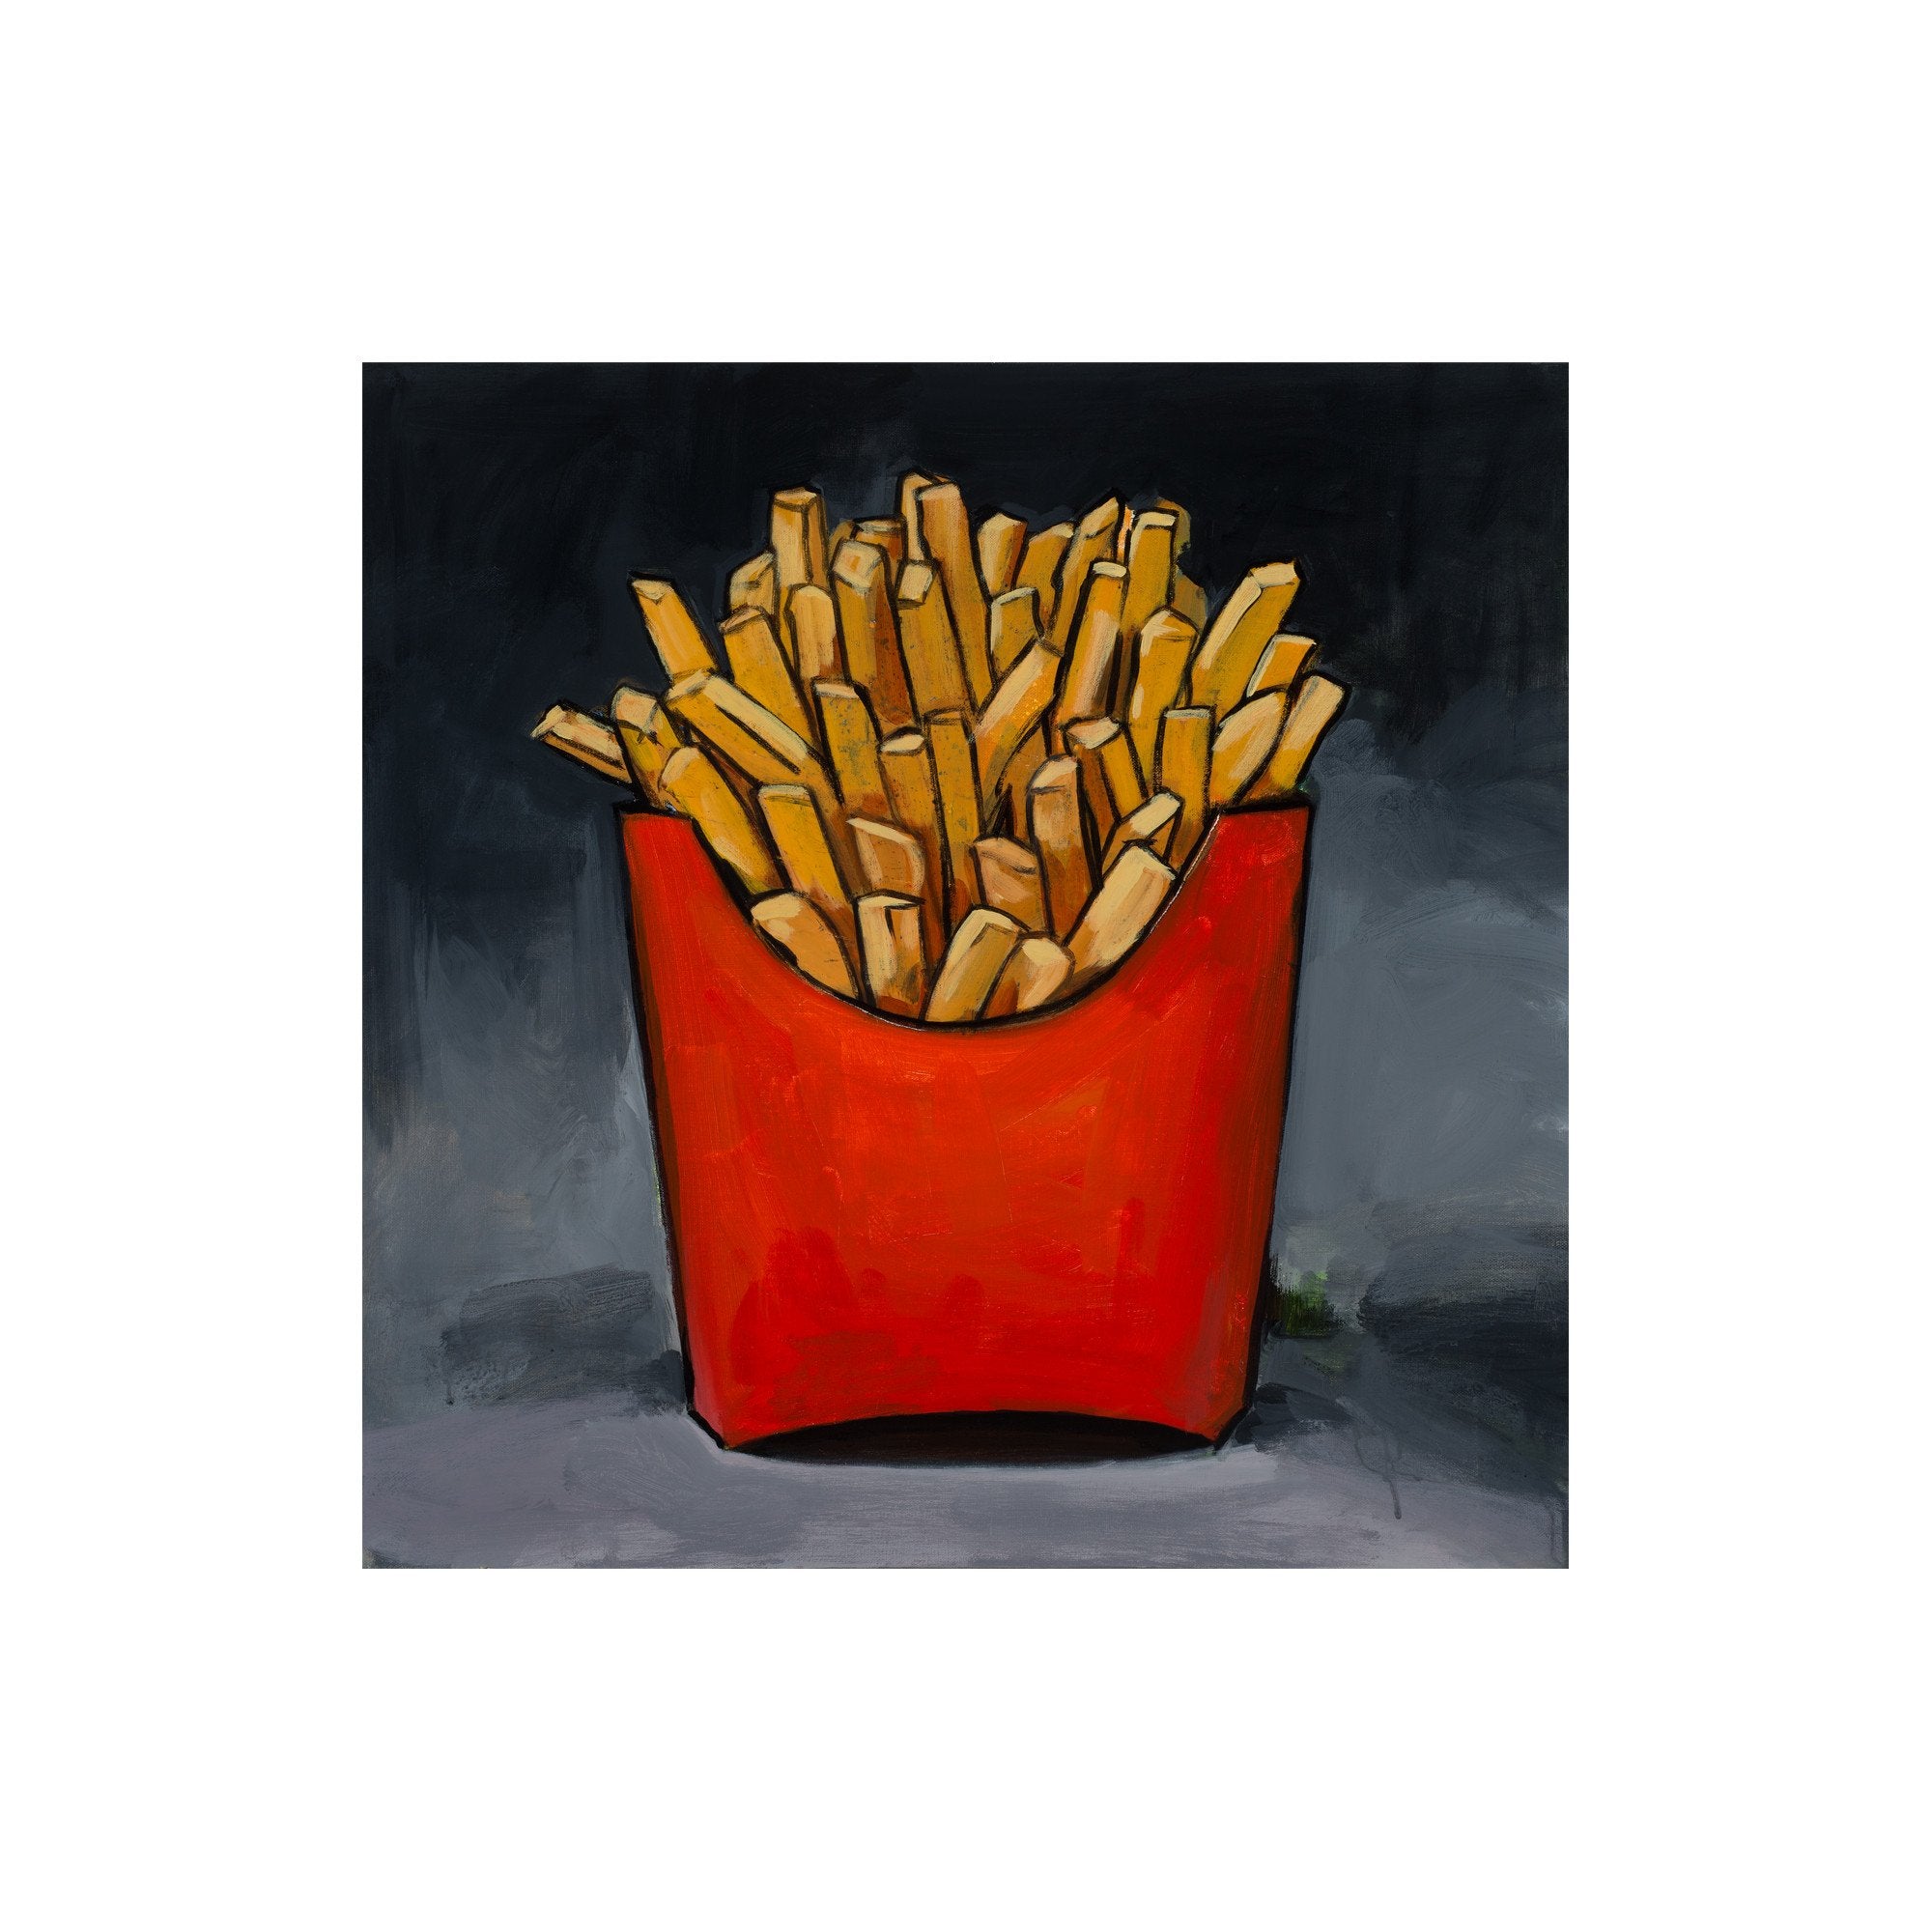 French Fries (Savarin) by Walter Robinson — Exhibition A